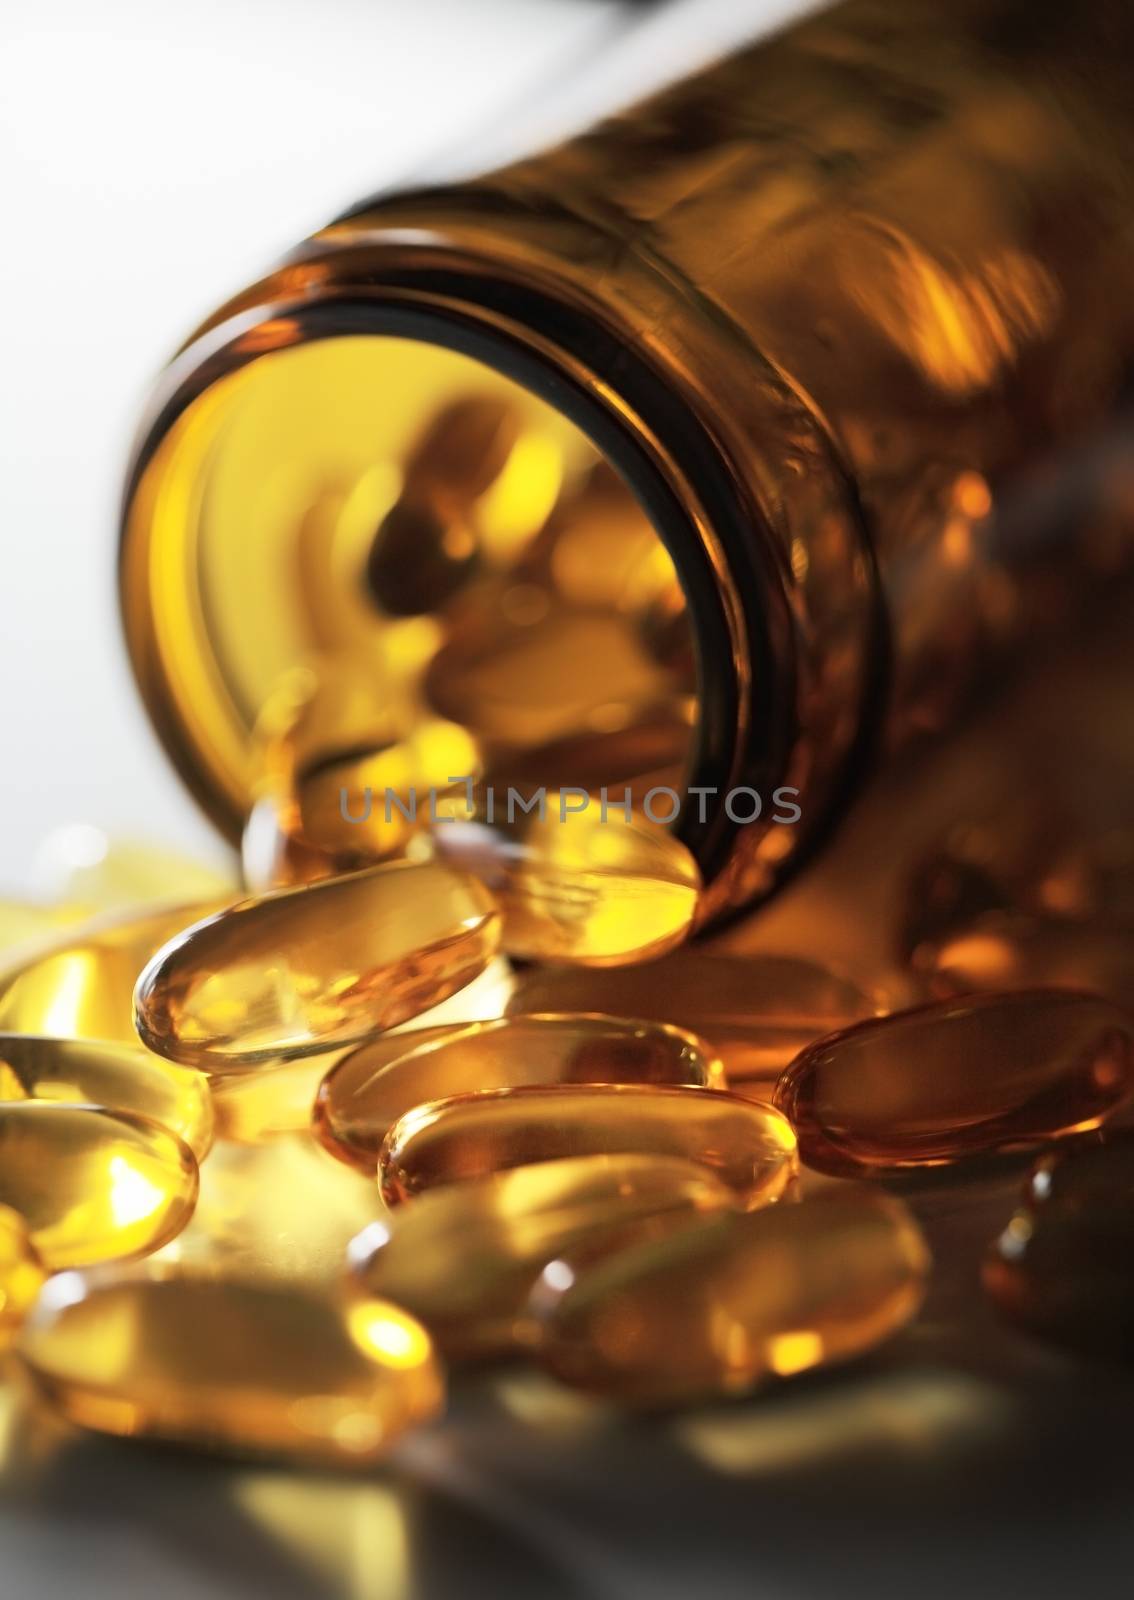 Fish Oil Capsules by Stocksnapper